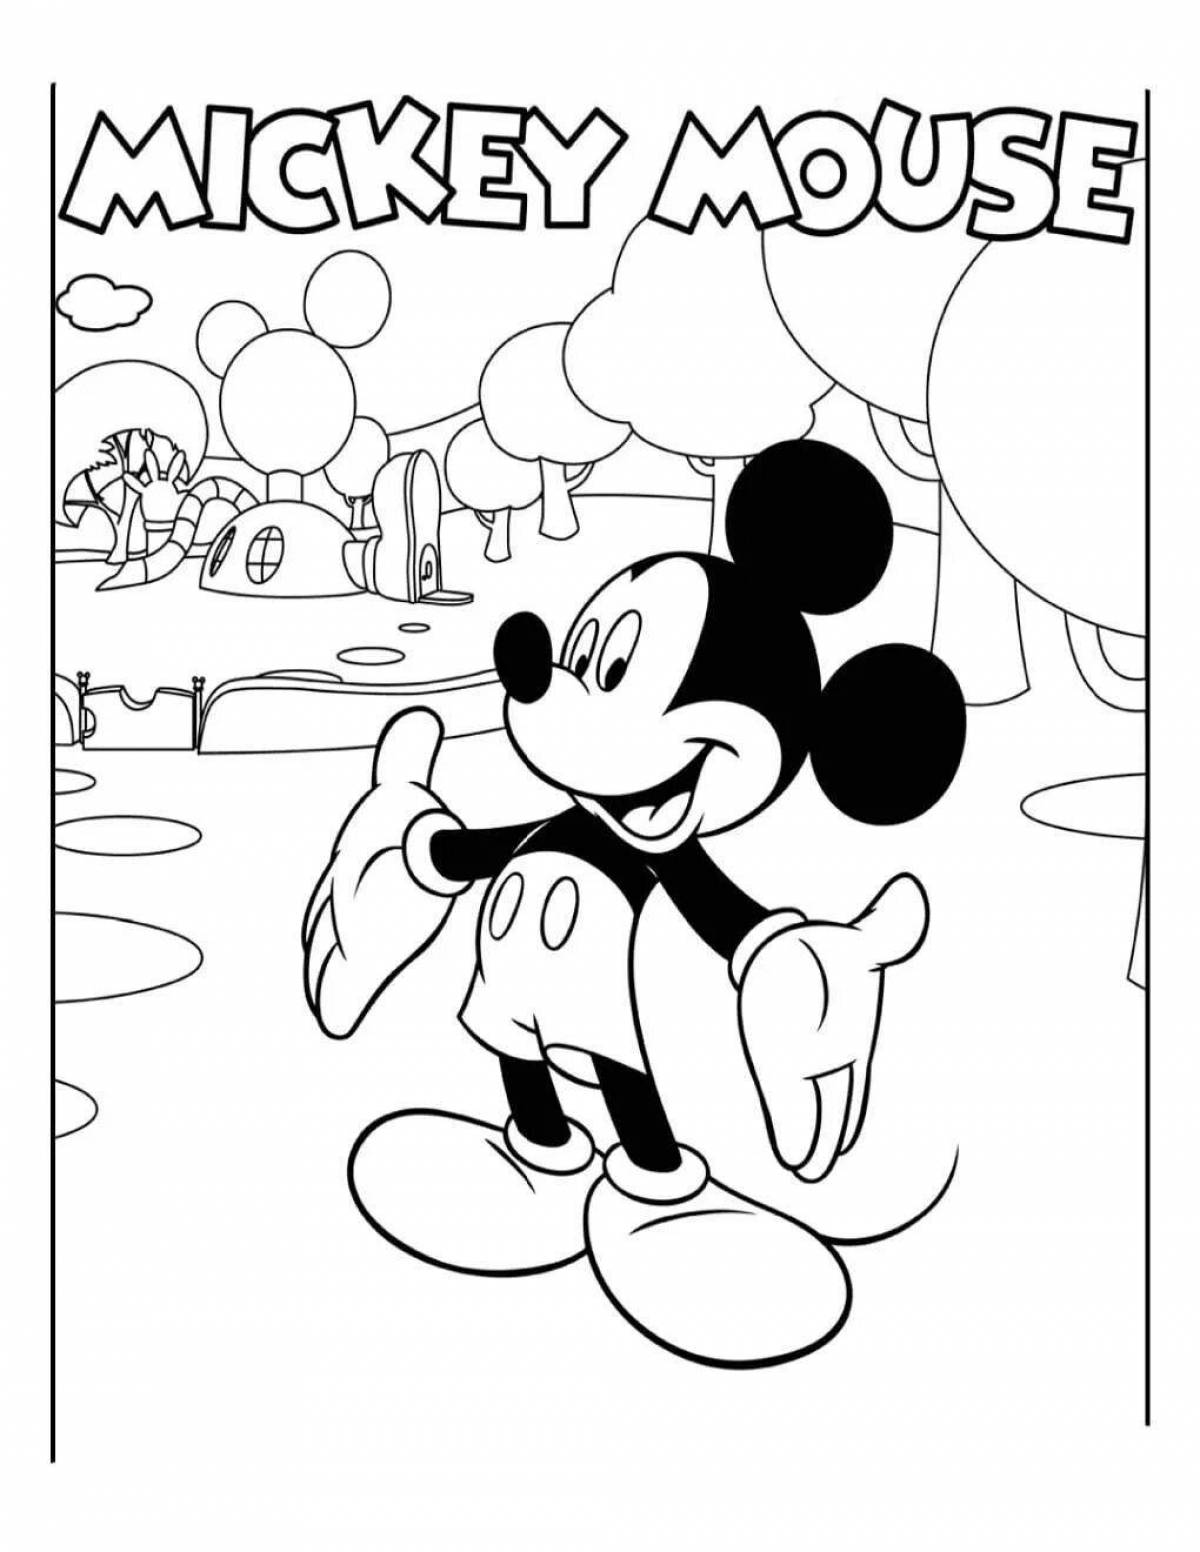 Mickey mouse club coloring page